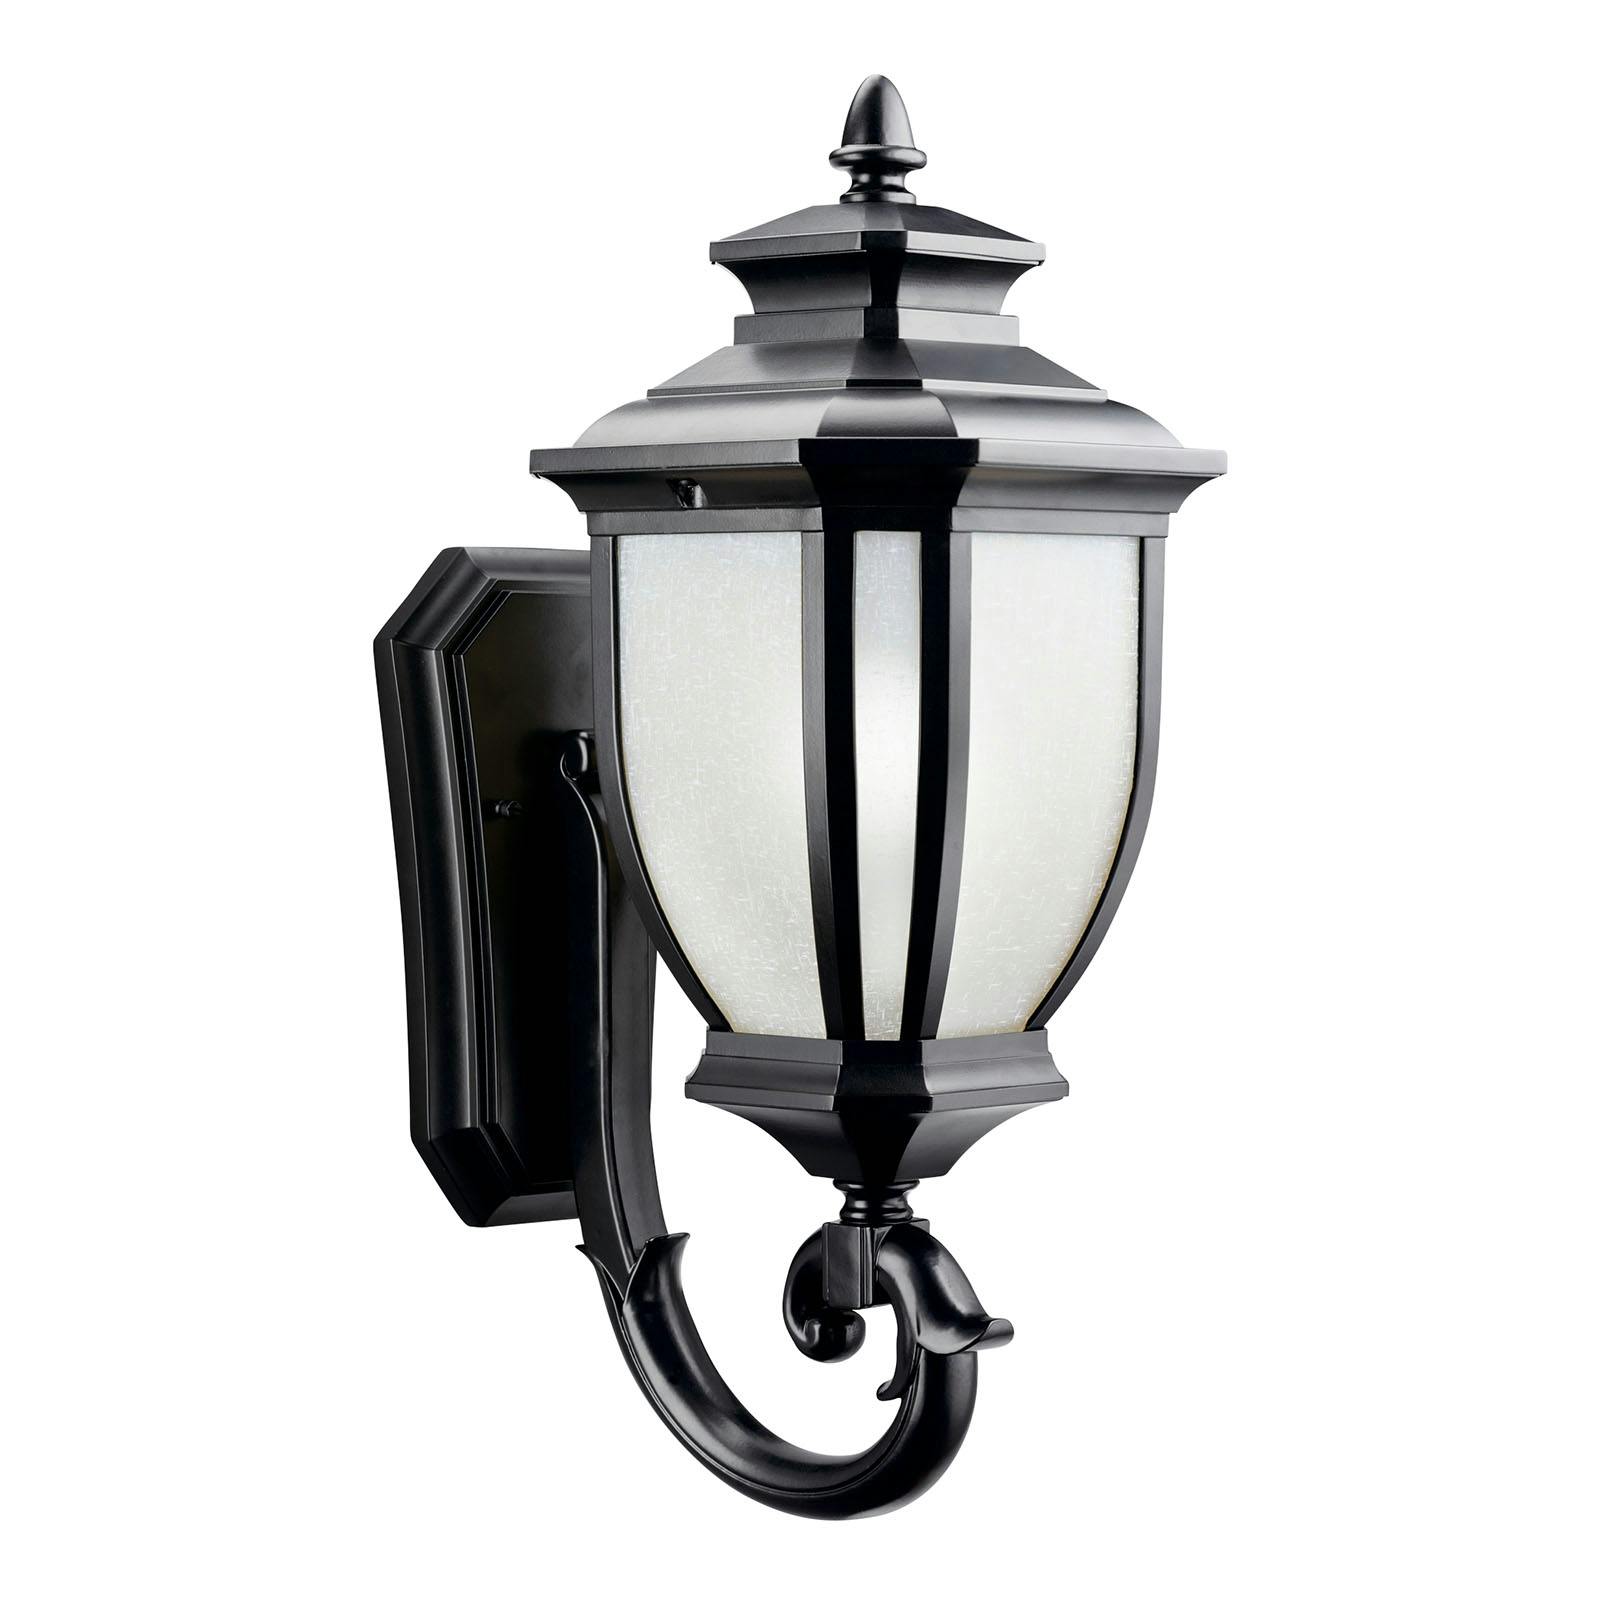 Salisbury 19.25" Wall Light in Black on a white background